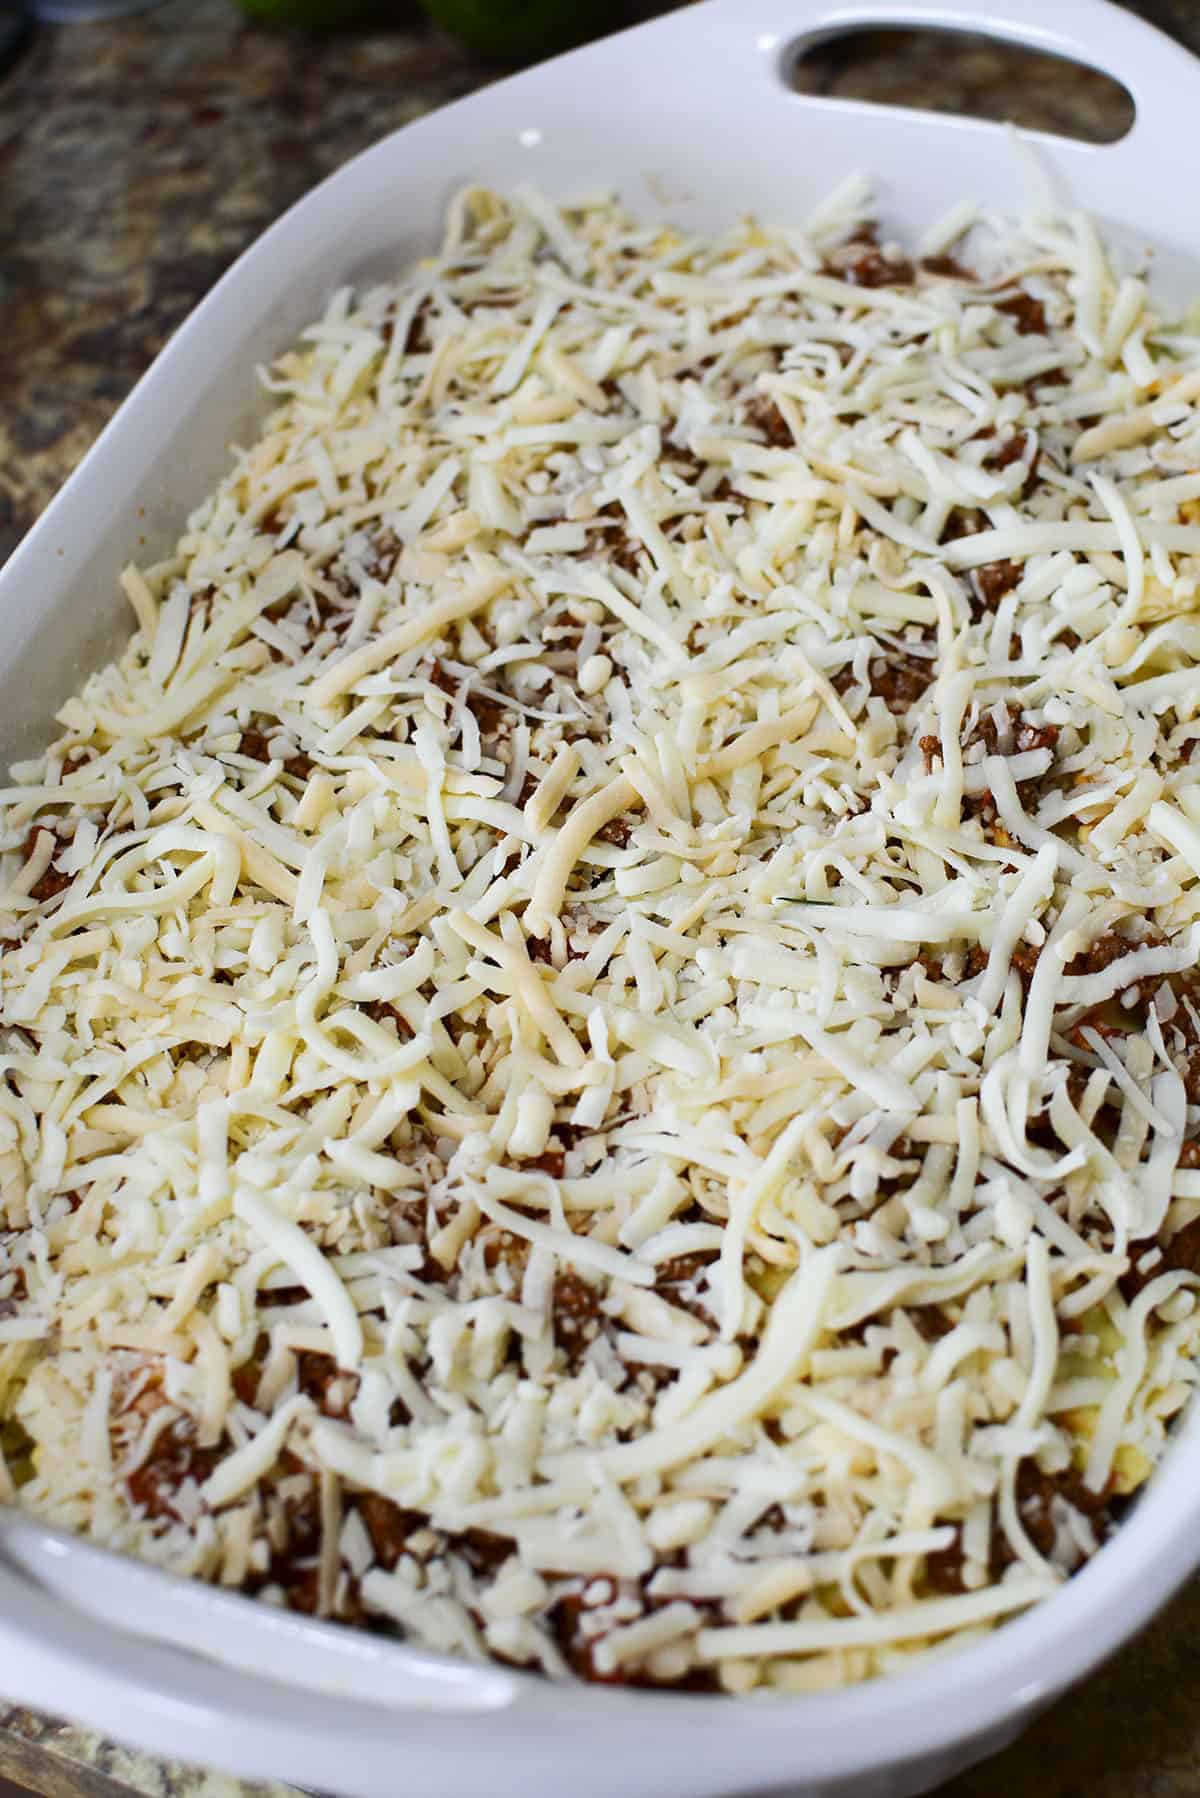 The lasagna assembled and ready to go into the oven.